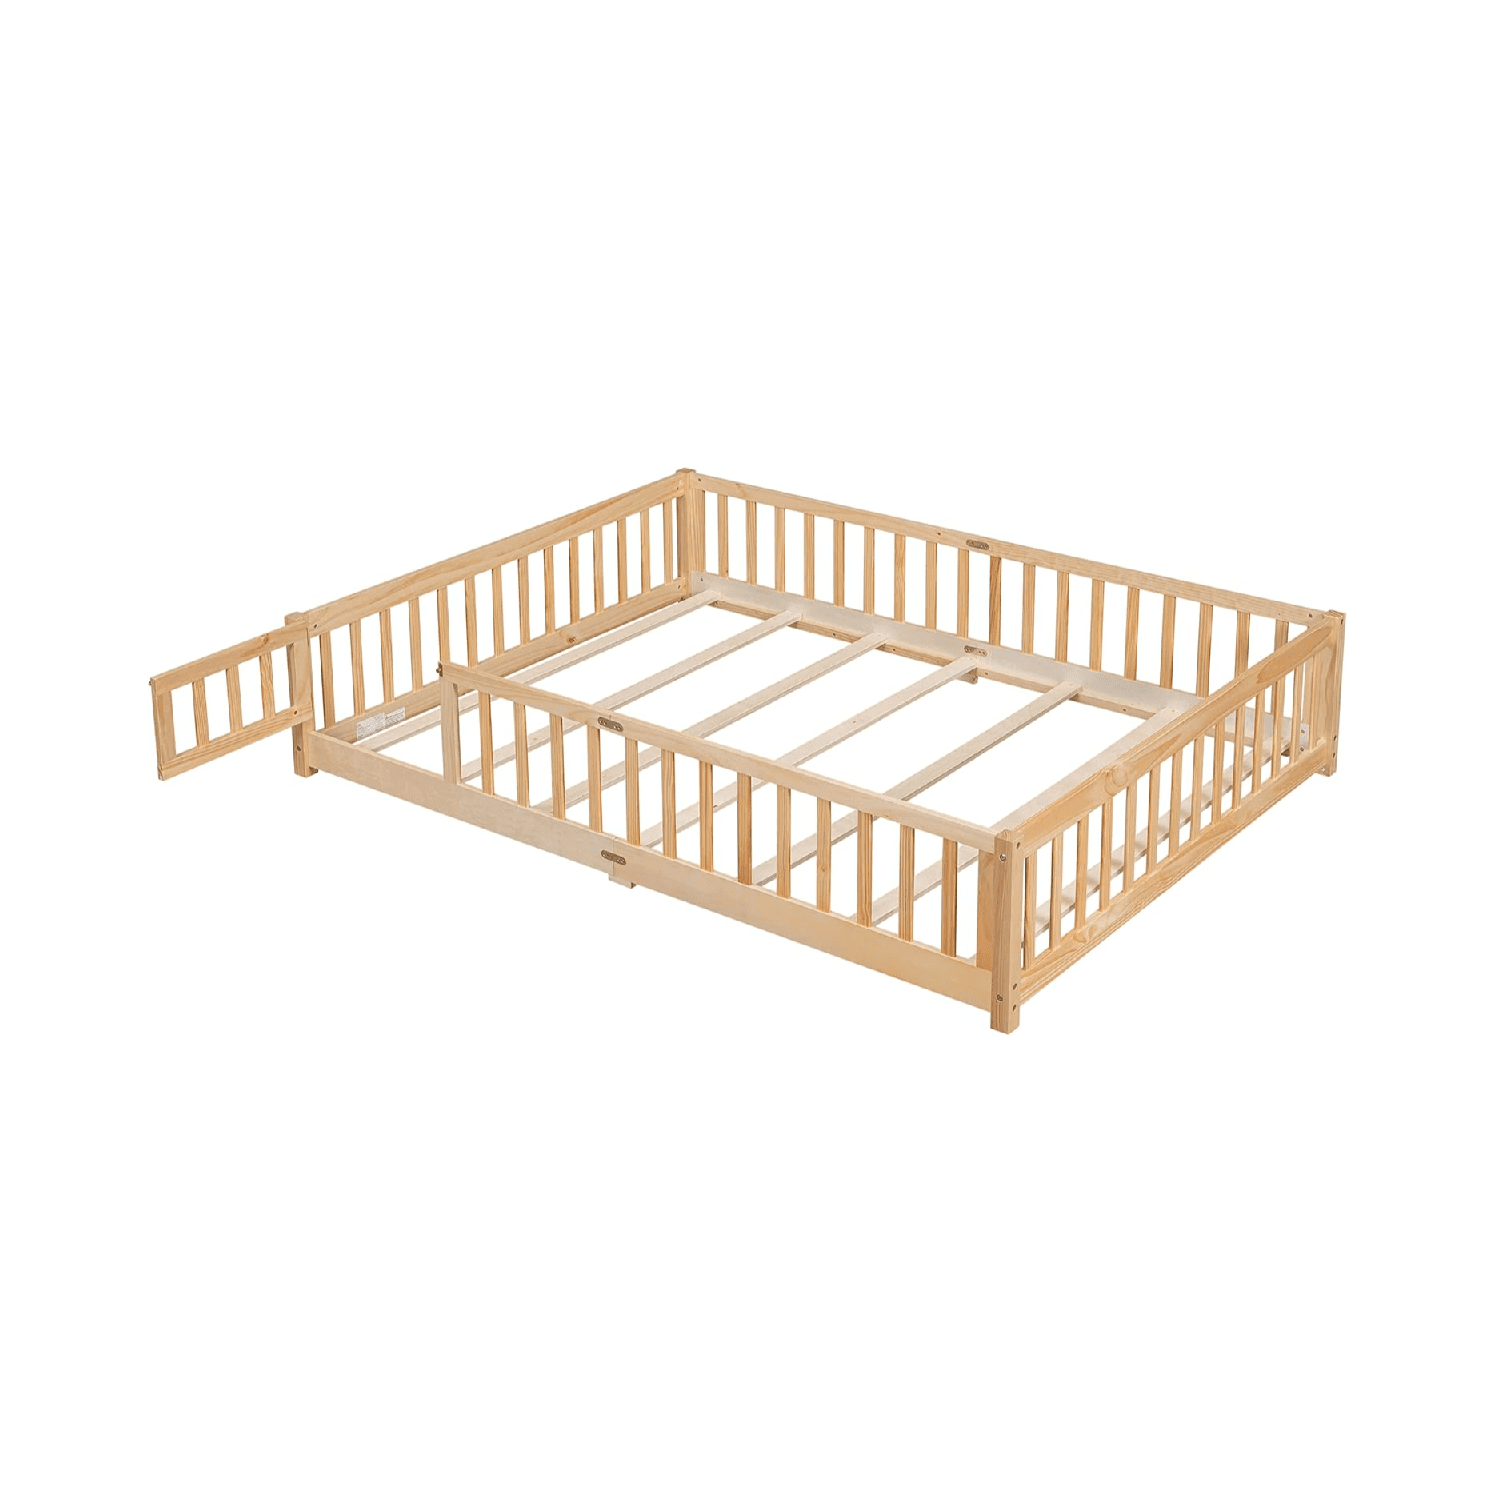 Montessori CITYLIGHT Queen Size Floor Bed With Rails and Slats Natural